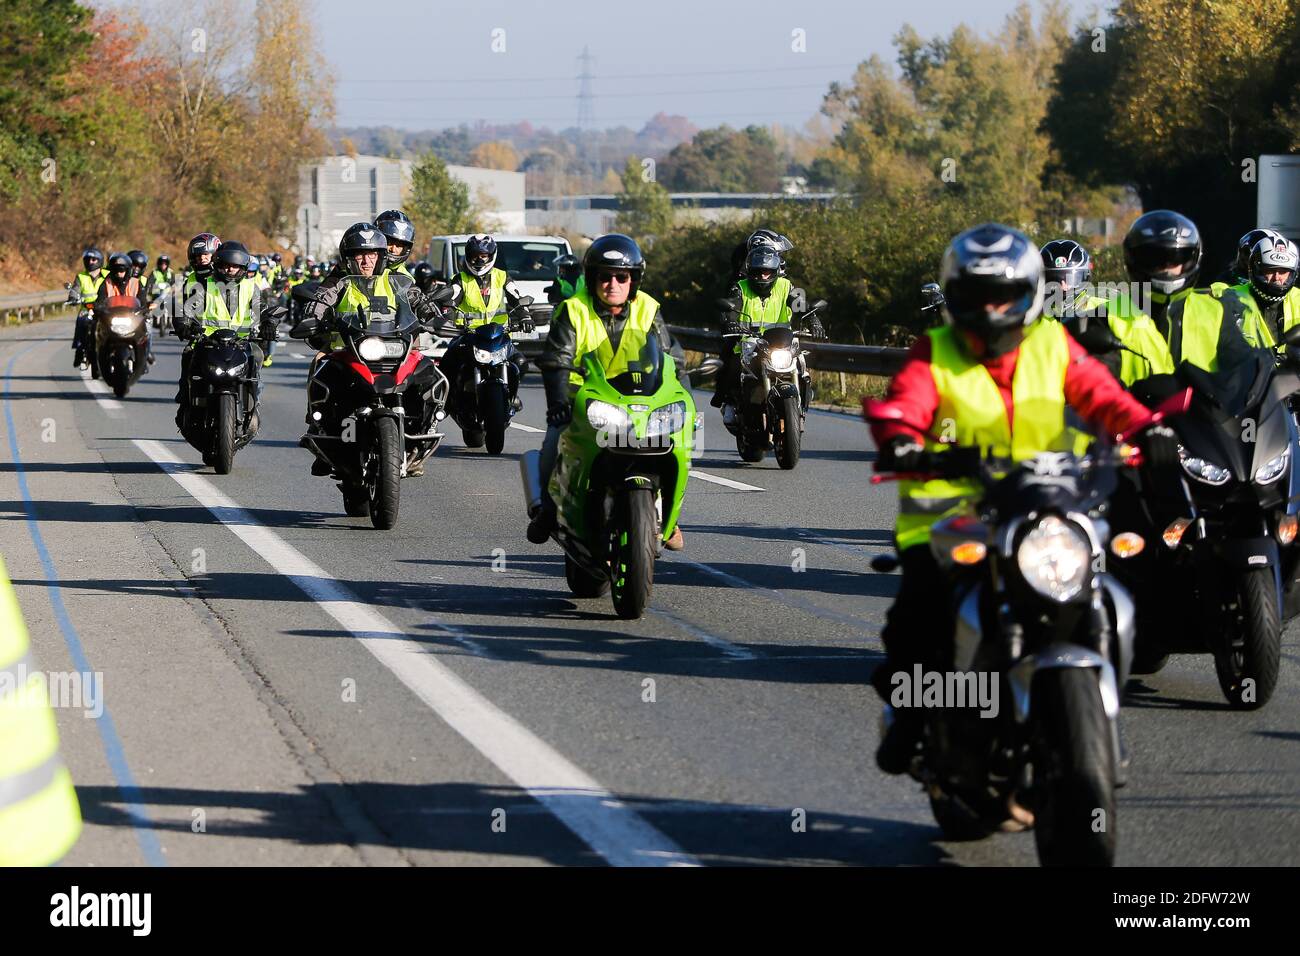 The participants of the "Yellow Vests" movement, during a go-slow operation on the Bordeaux ring road.on November 17, 2018 in Bordeaux, France. Photo by Thibaud MORITZ ABACAPRESS.COM Stock Photo